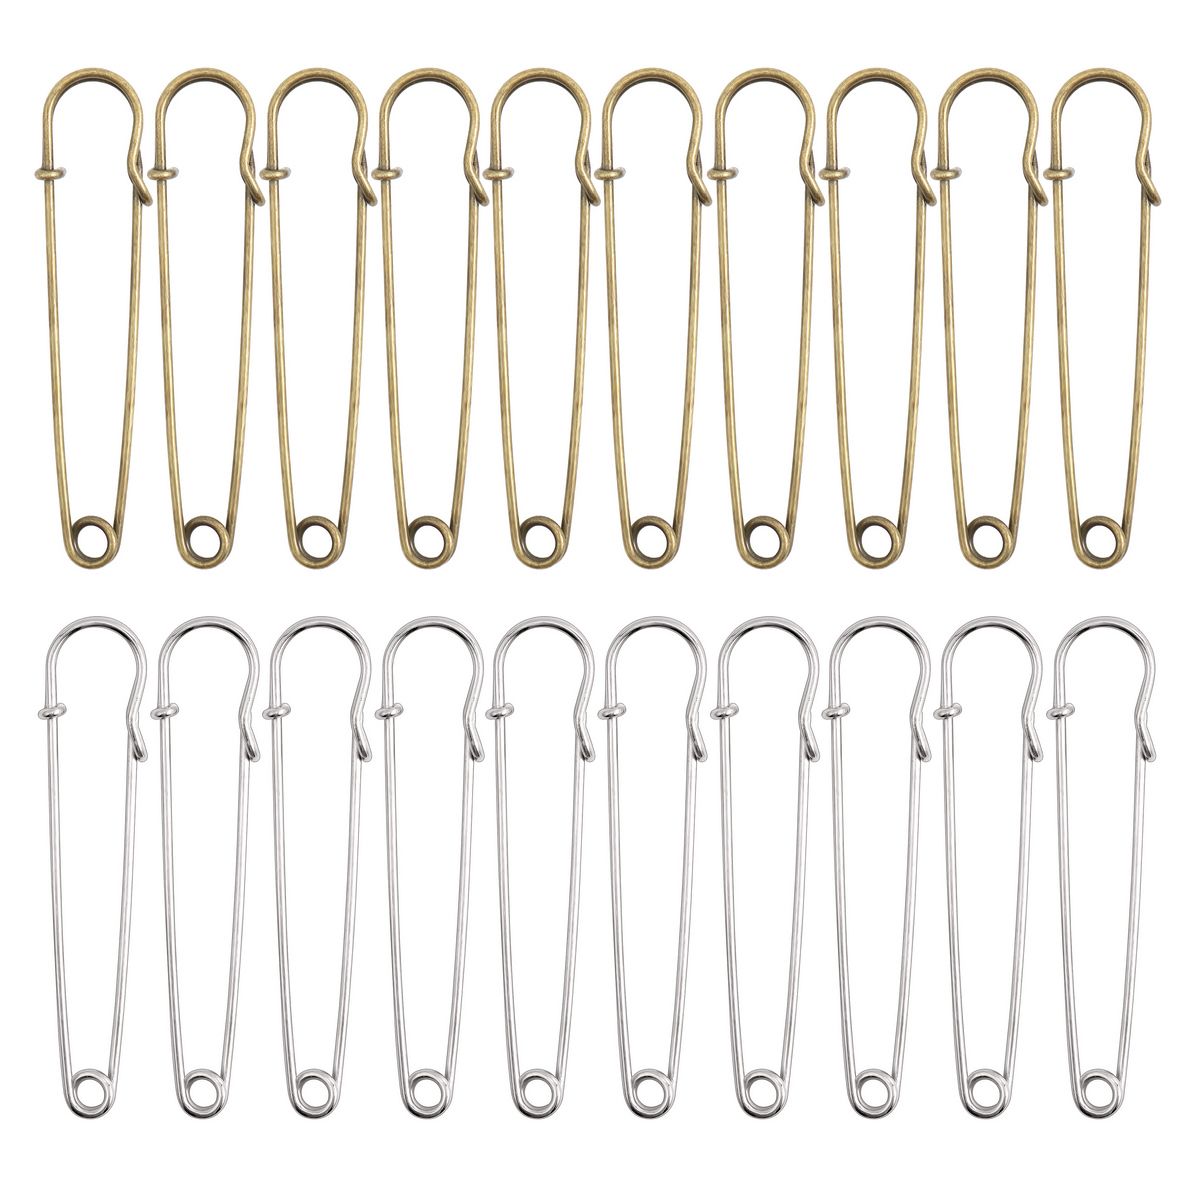 Deago 10 Pcs 3 Inch Safety Pins Large Heavy Duty Stainless Steel Safety Pins  for Blankets, Skirts, Crafts, Kilts (Bronze) 